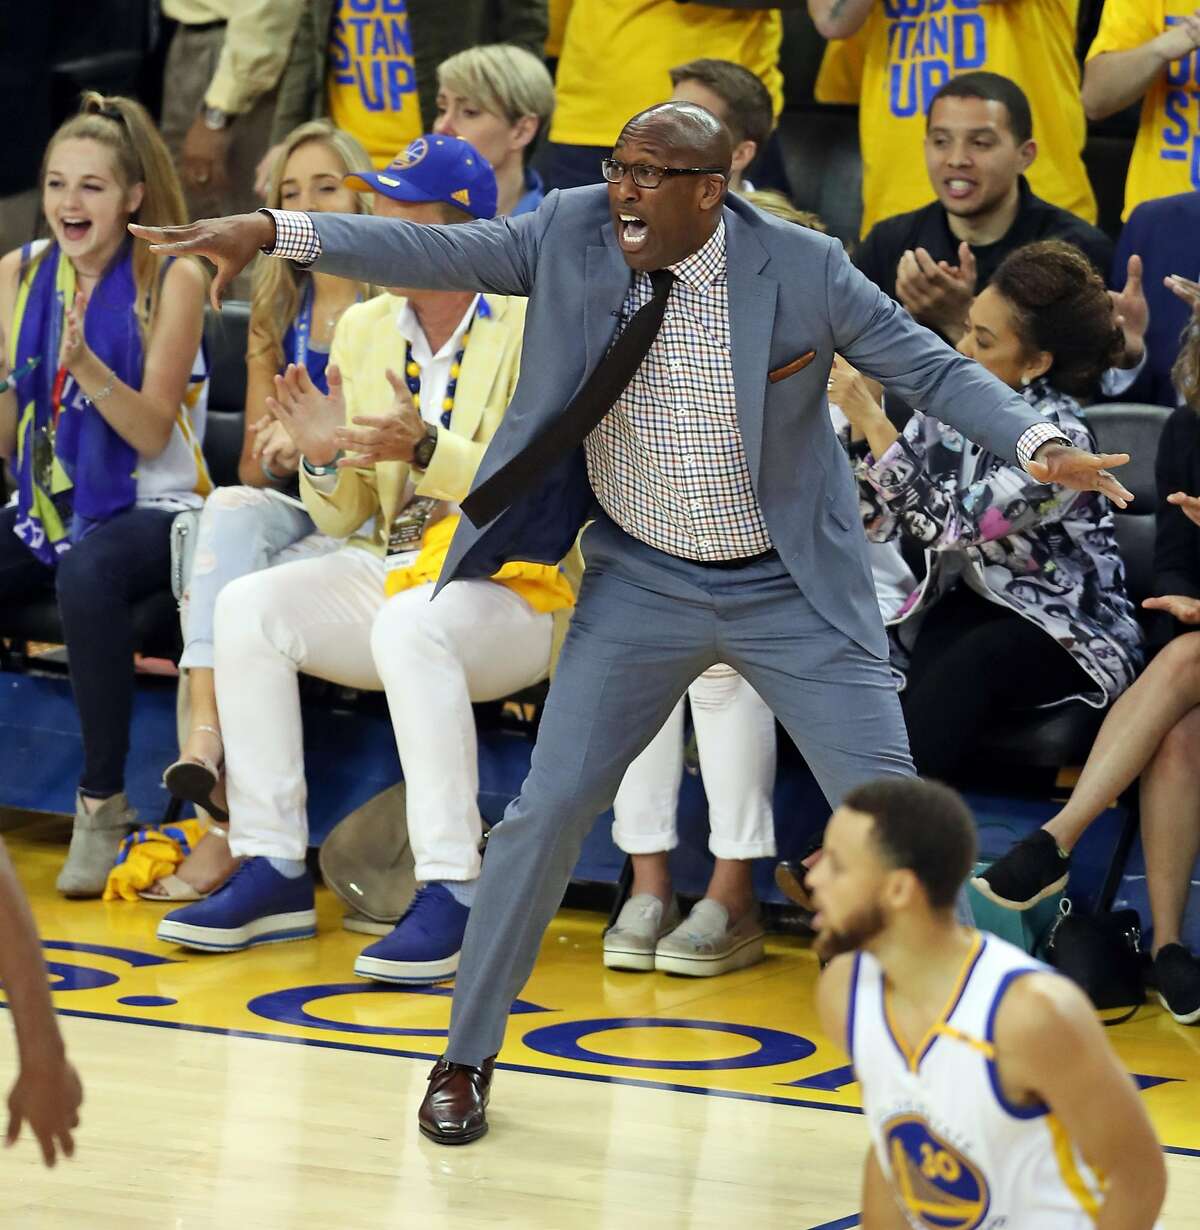 Golden State Warriors' interim head coach Mike Brown reacts in final minute of 4th quarter during Warriors' 113-111 win over San Antonio Spurs during Game 1 of NBA Western Conference Finals at Oracle Arena in Oakland, Calif., on Sunday, May 14, 2017.